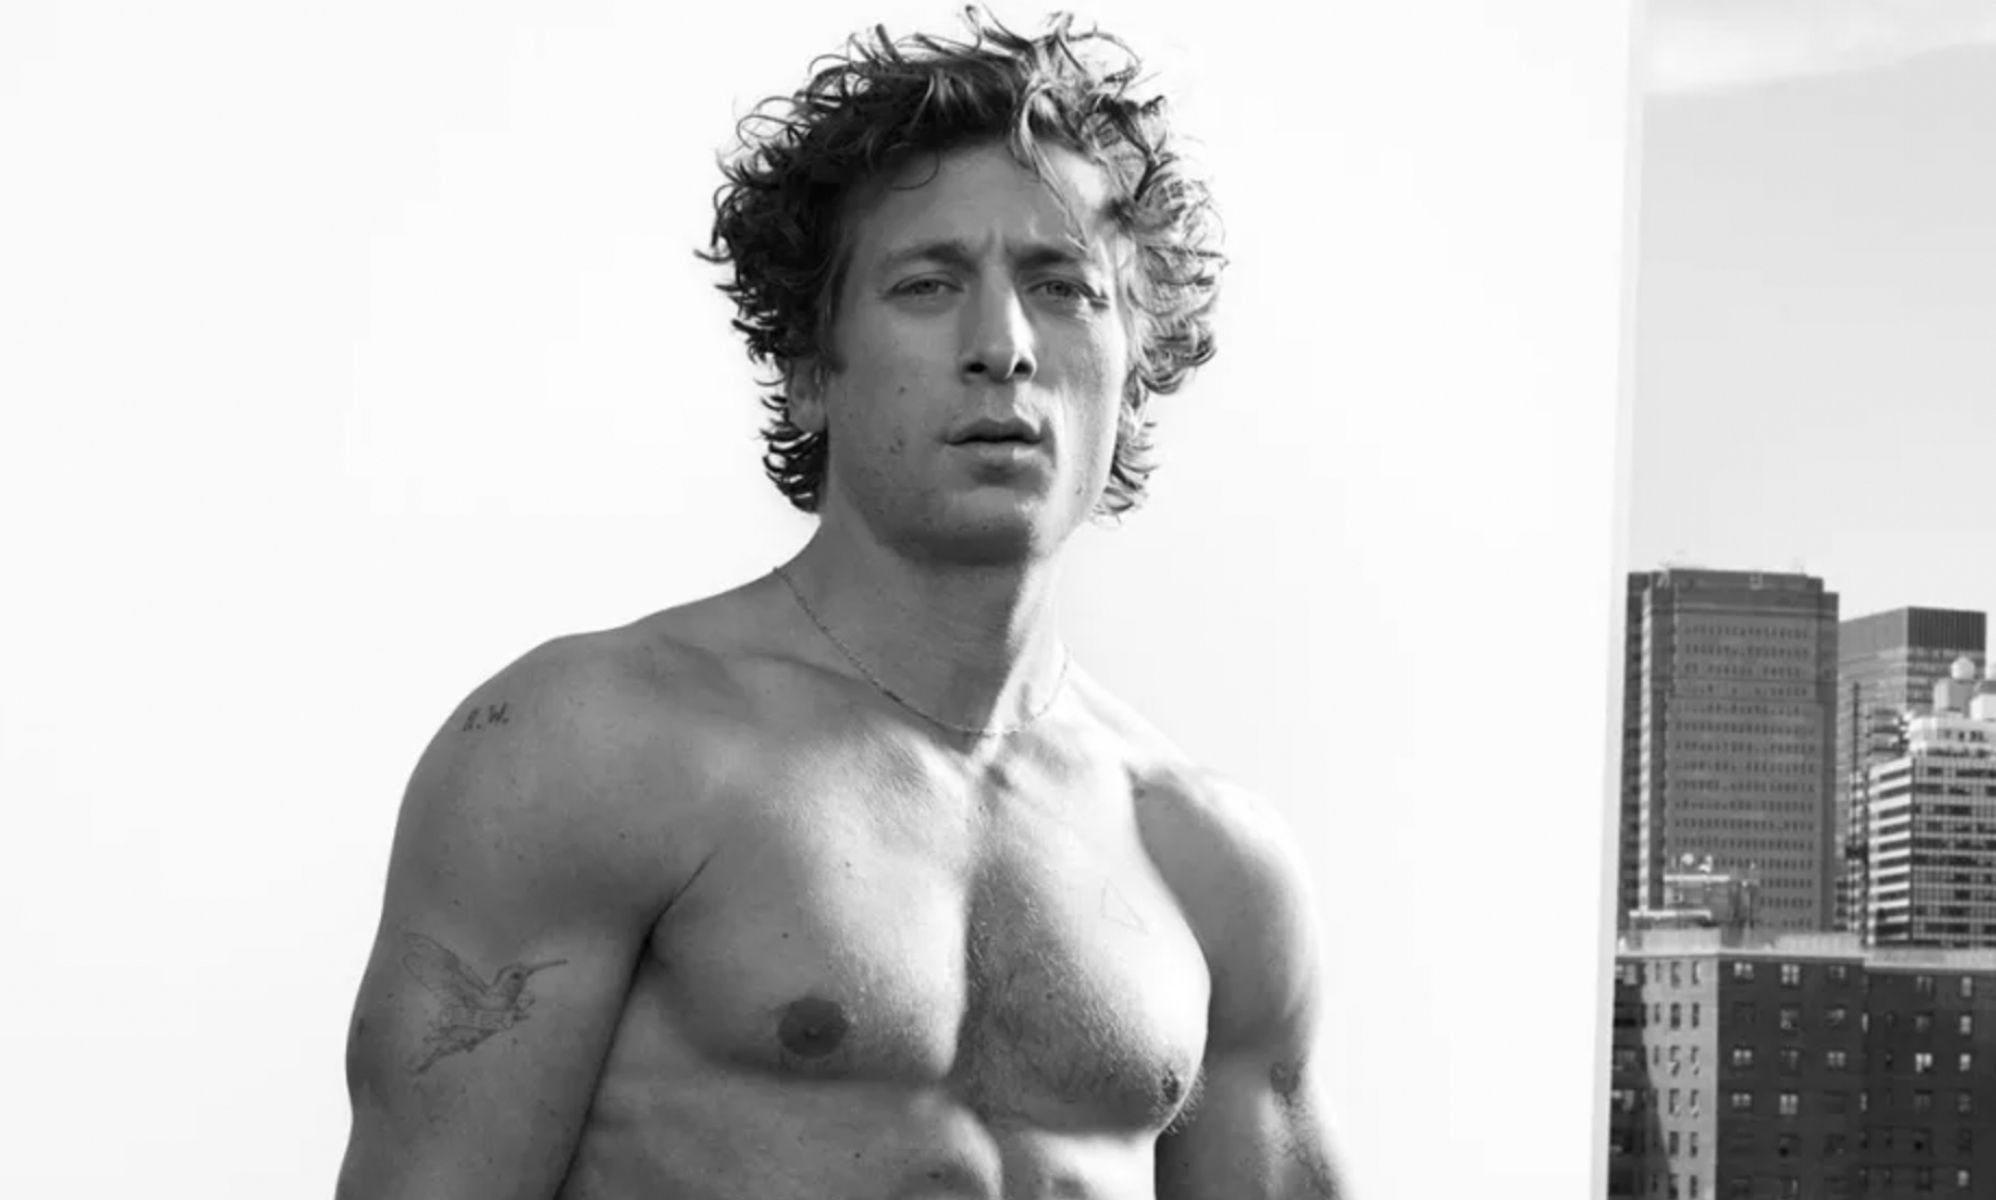 Jeremy Allen White's Calvin Klein shoot made accessible to blind